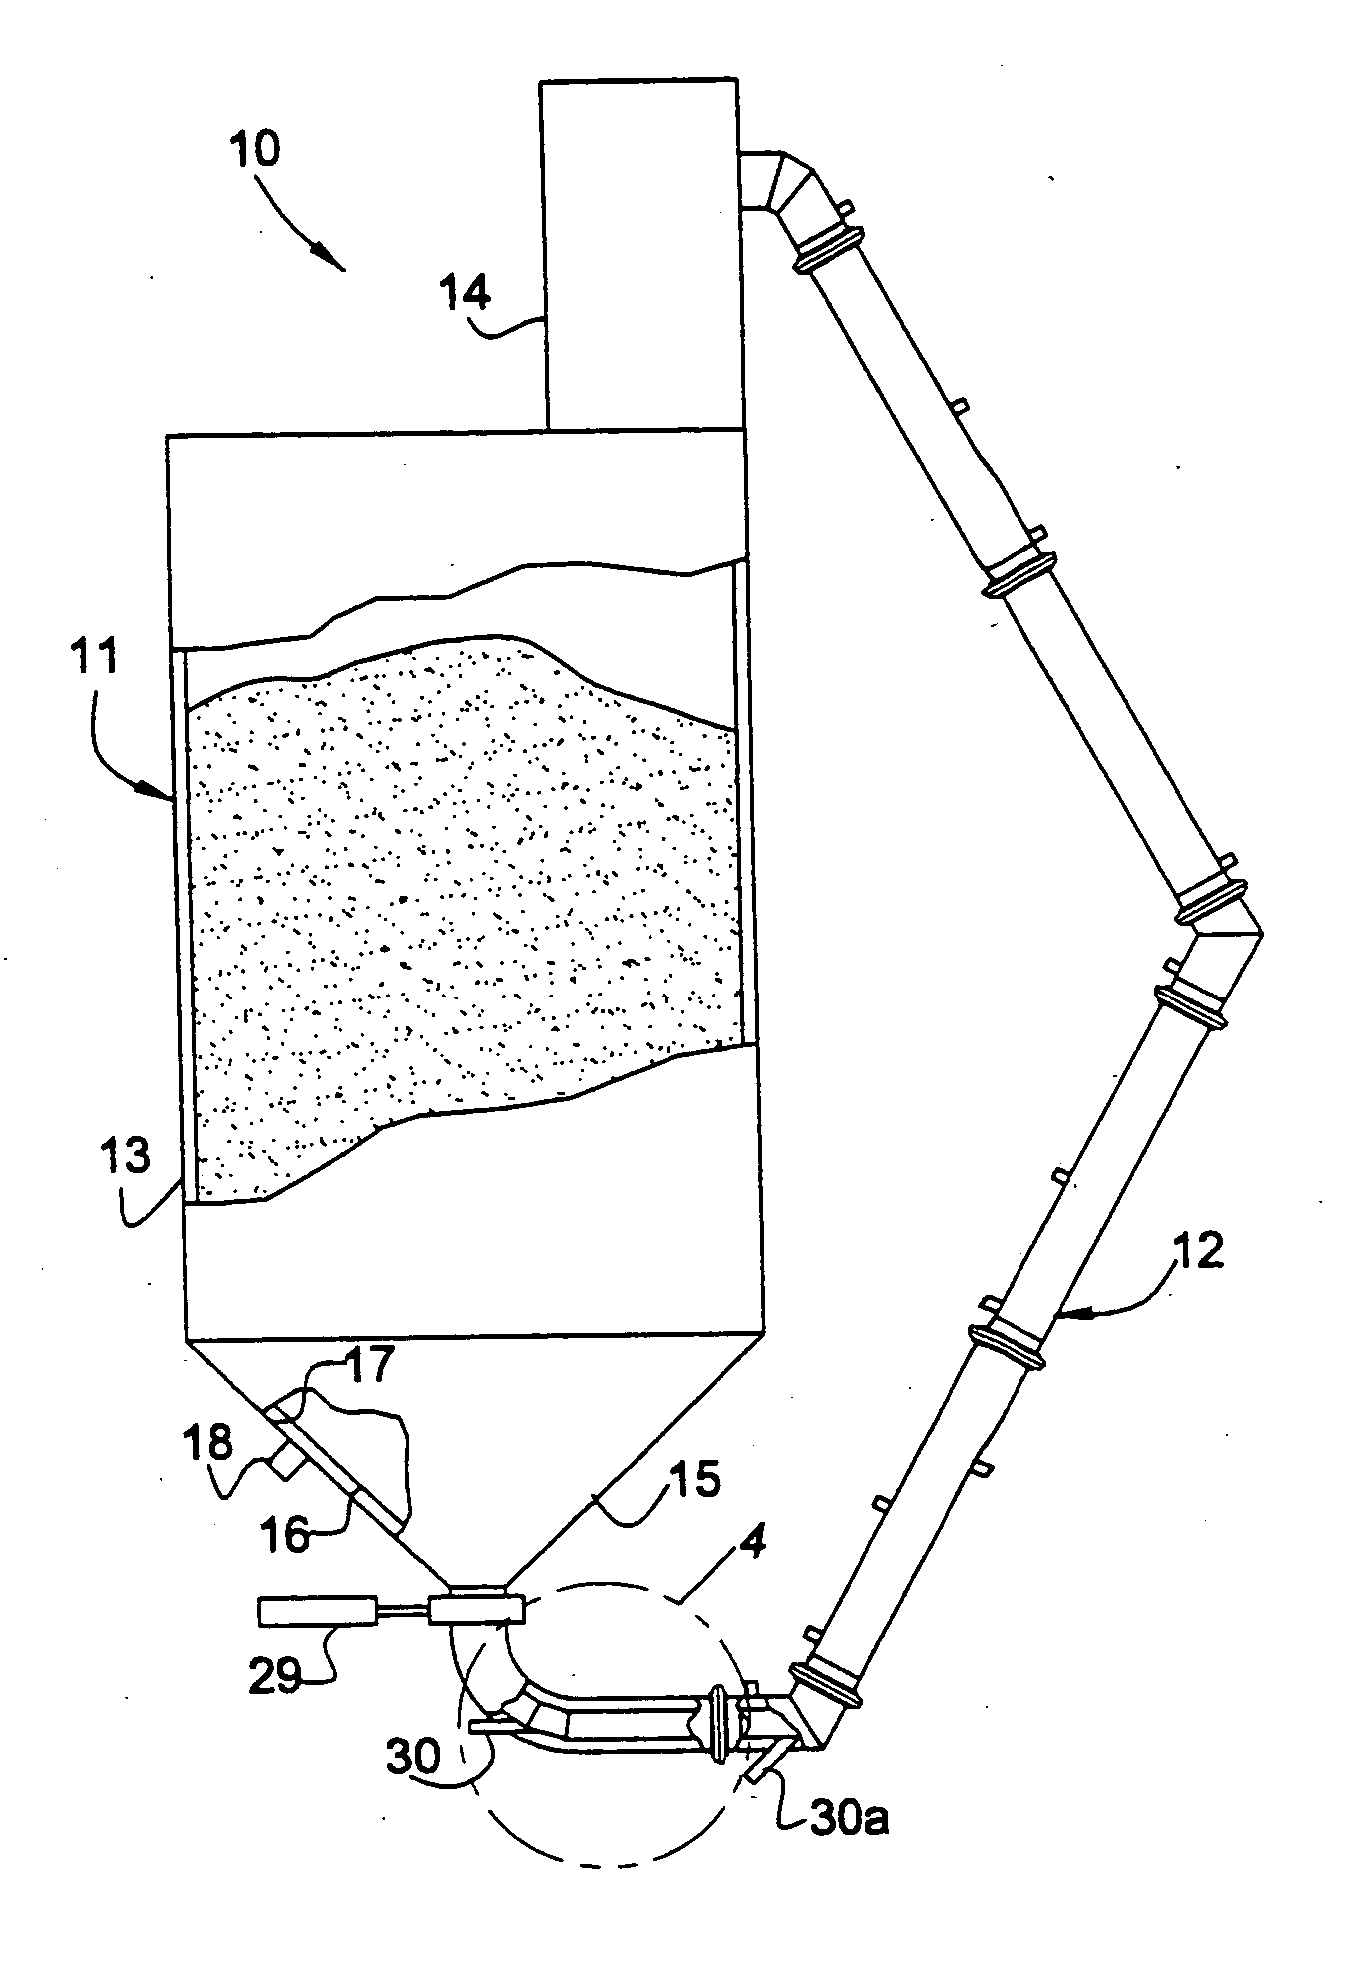 System for pneumatically conveying bulk particulate materials